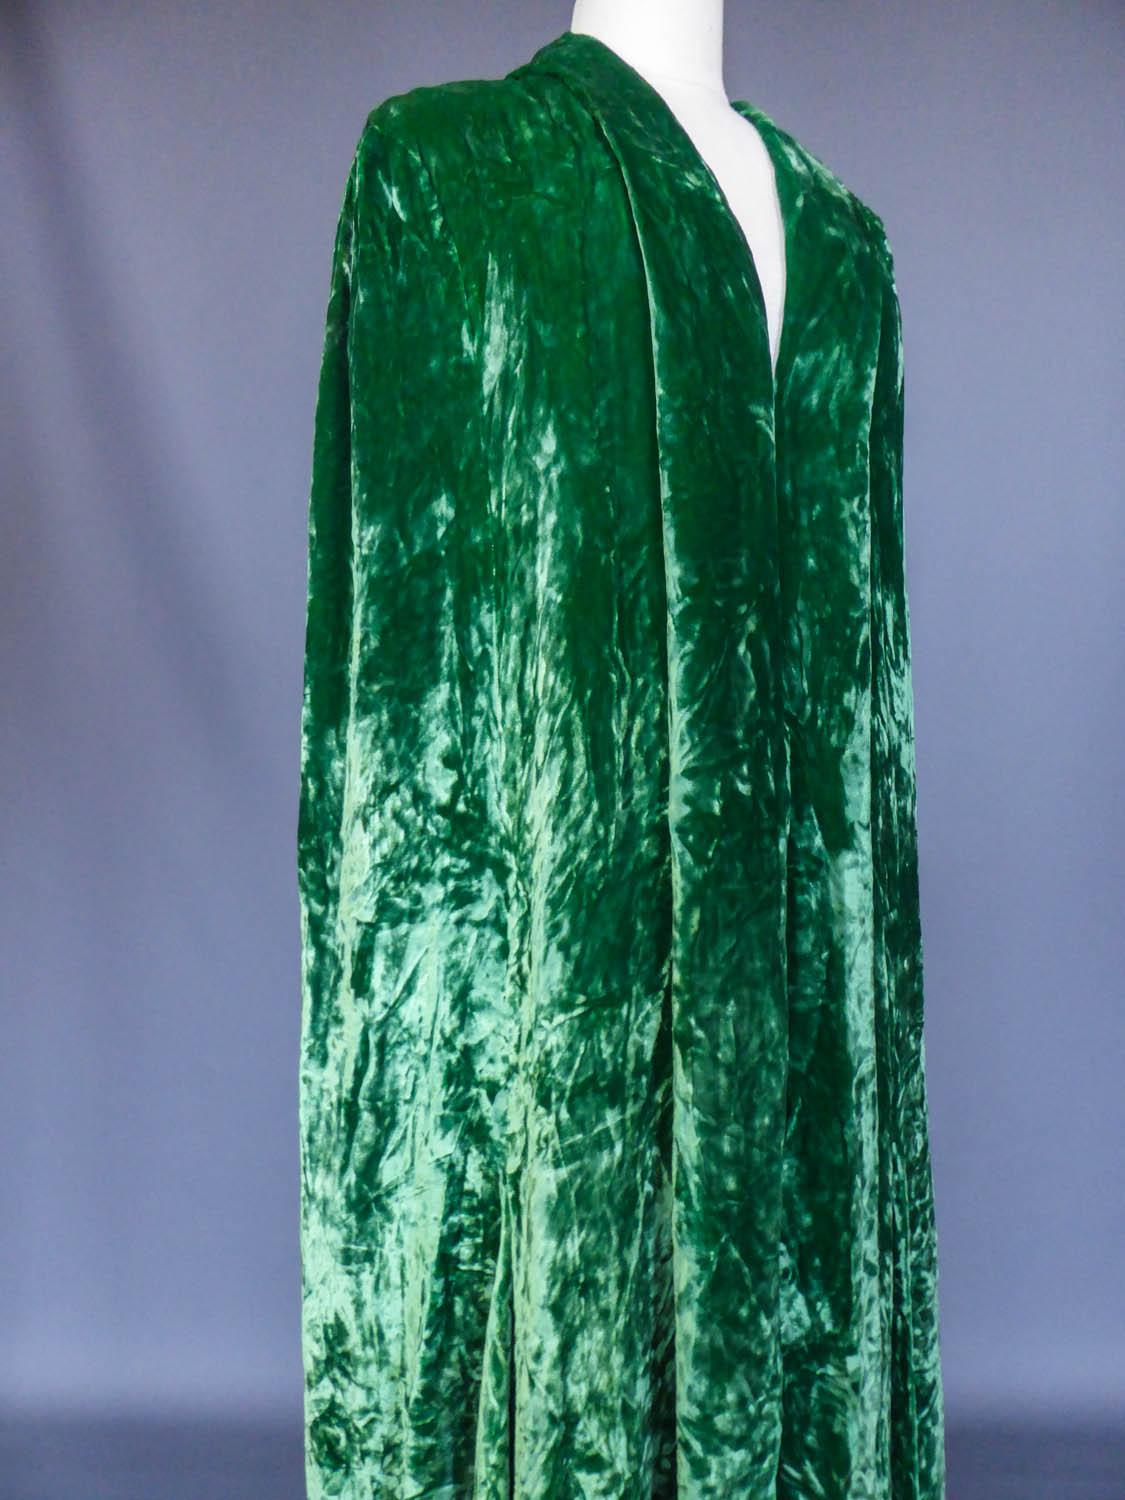 Circa 1930/1940
France
Long evening green emerald velvet cape labelled from the House Jean Patou and dating from the 1930s. Matching green silk satin lining. Sleeveless but shoulders cut to shape. Very good condition of color and